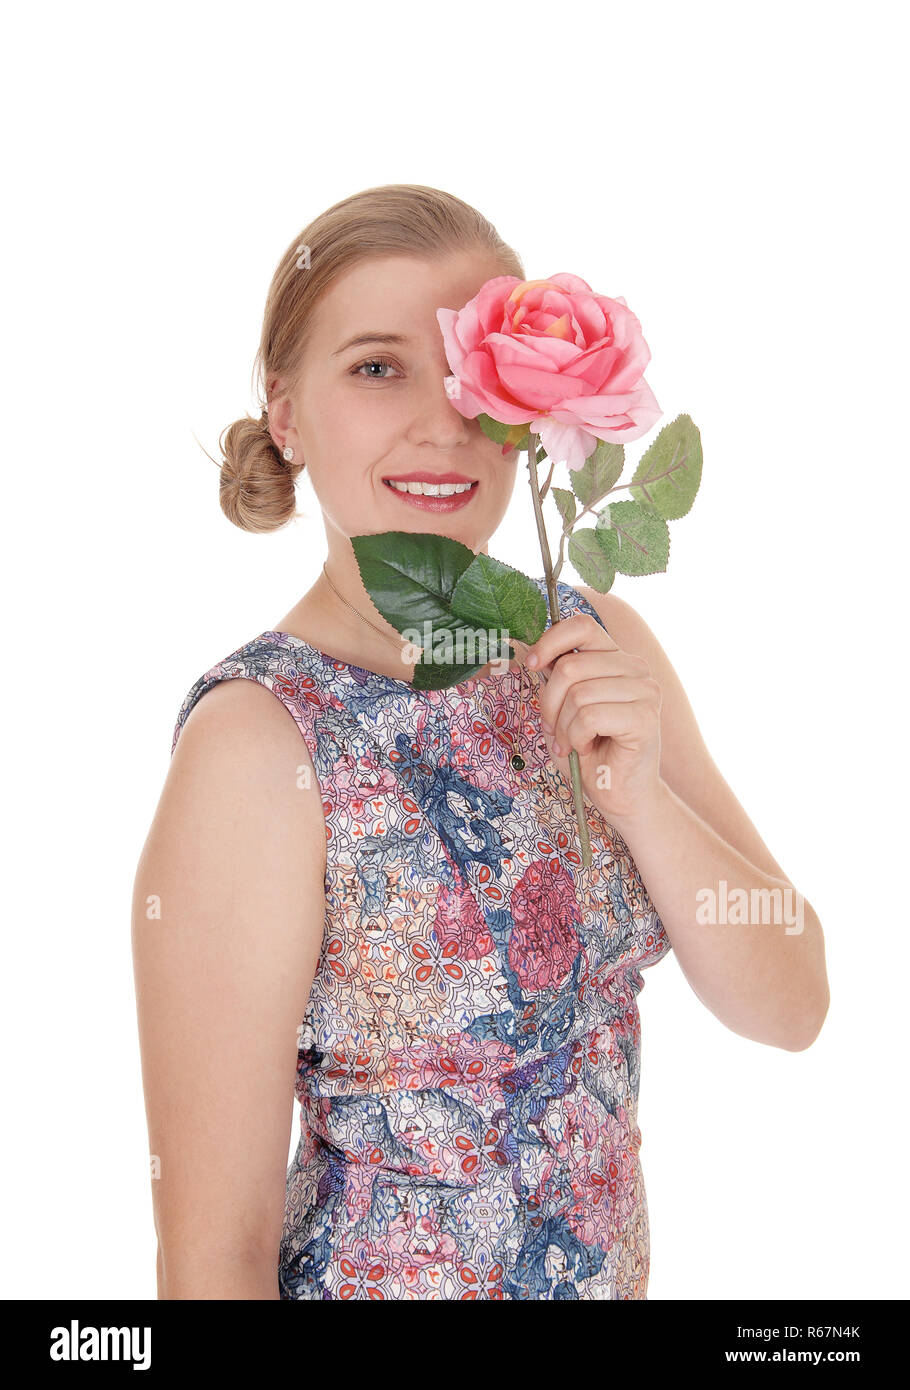 Woman standing in dress with rose on her face Stock Photo